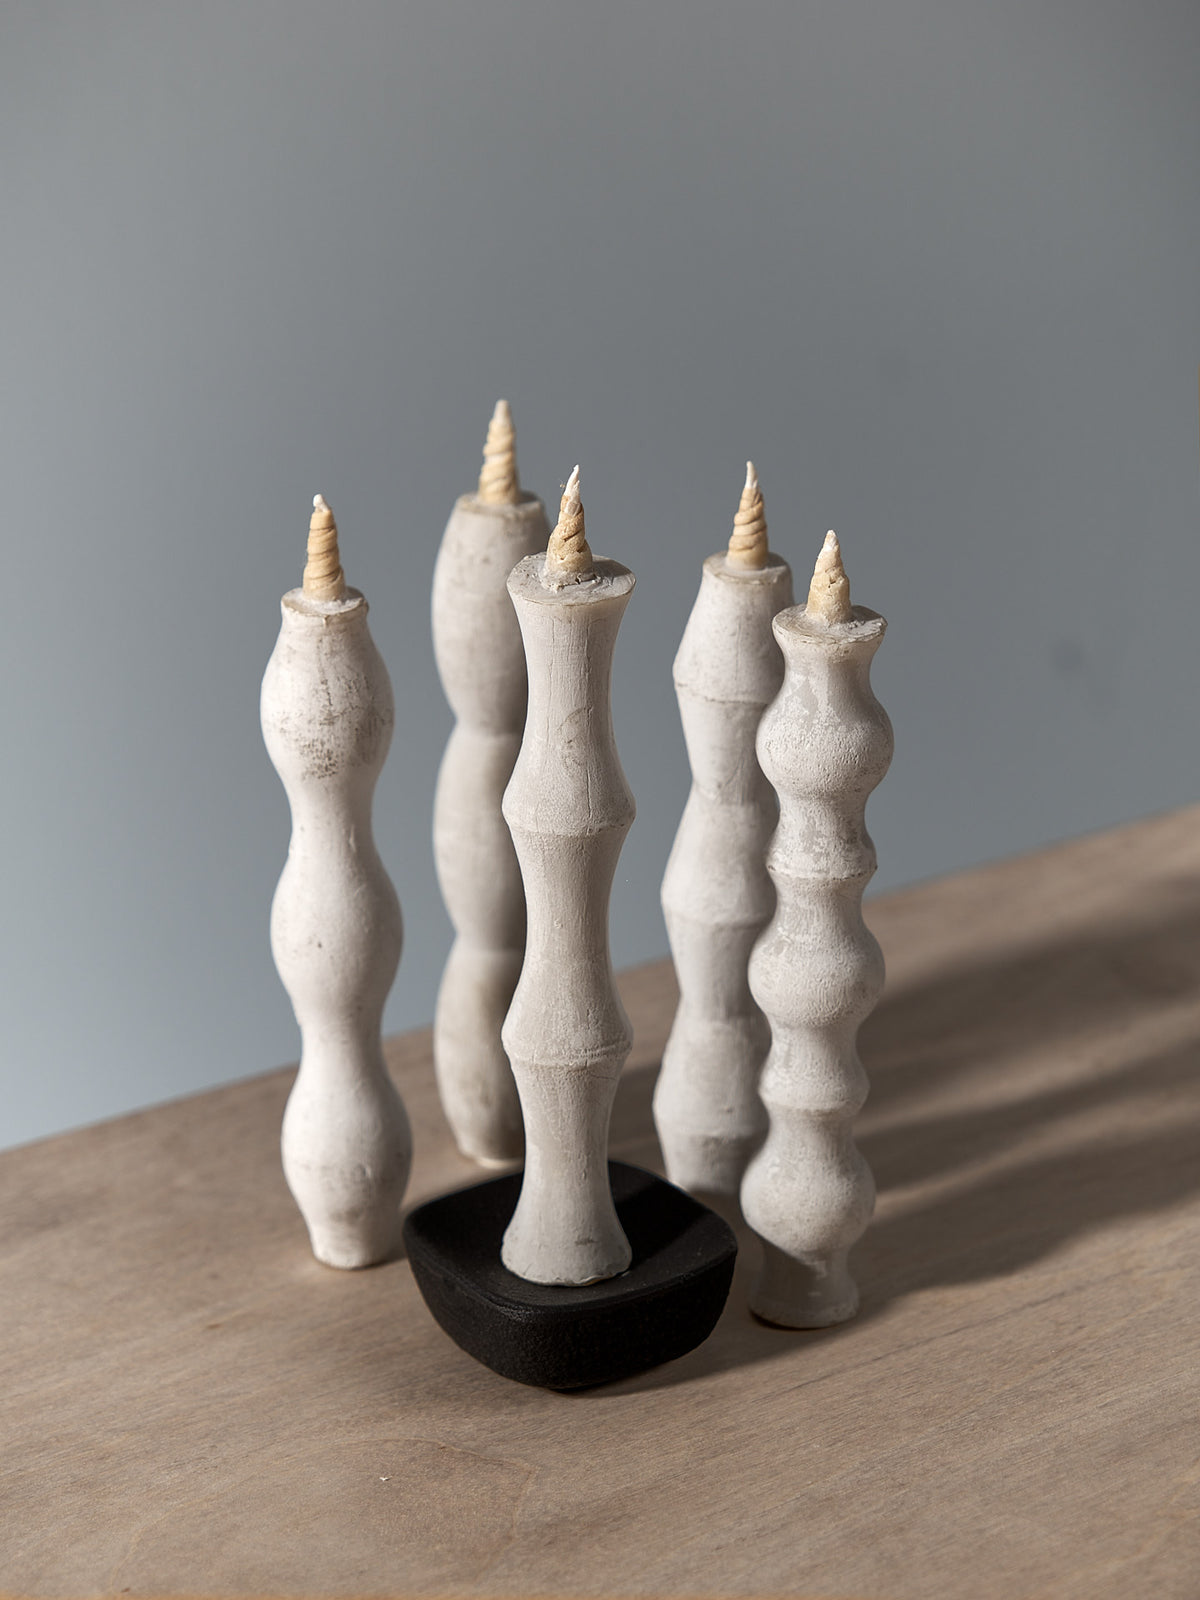 Four NANAO-T candle holders on a wooden table. (Brand: Takazawa)